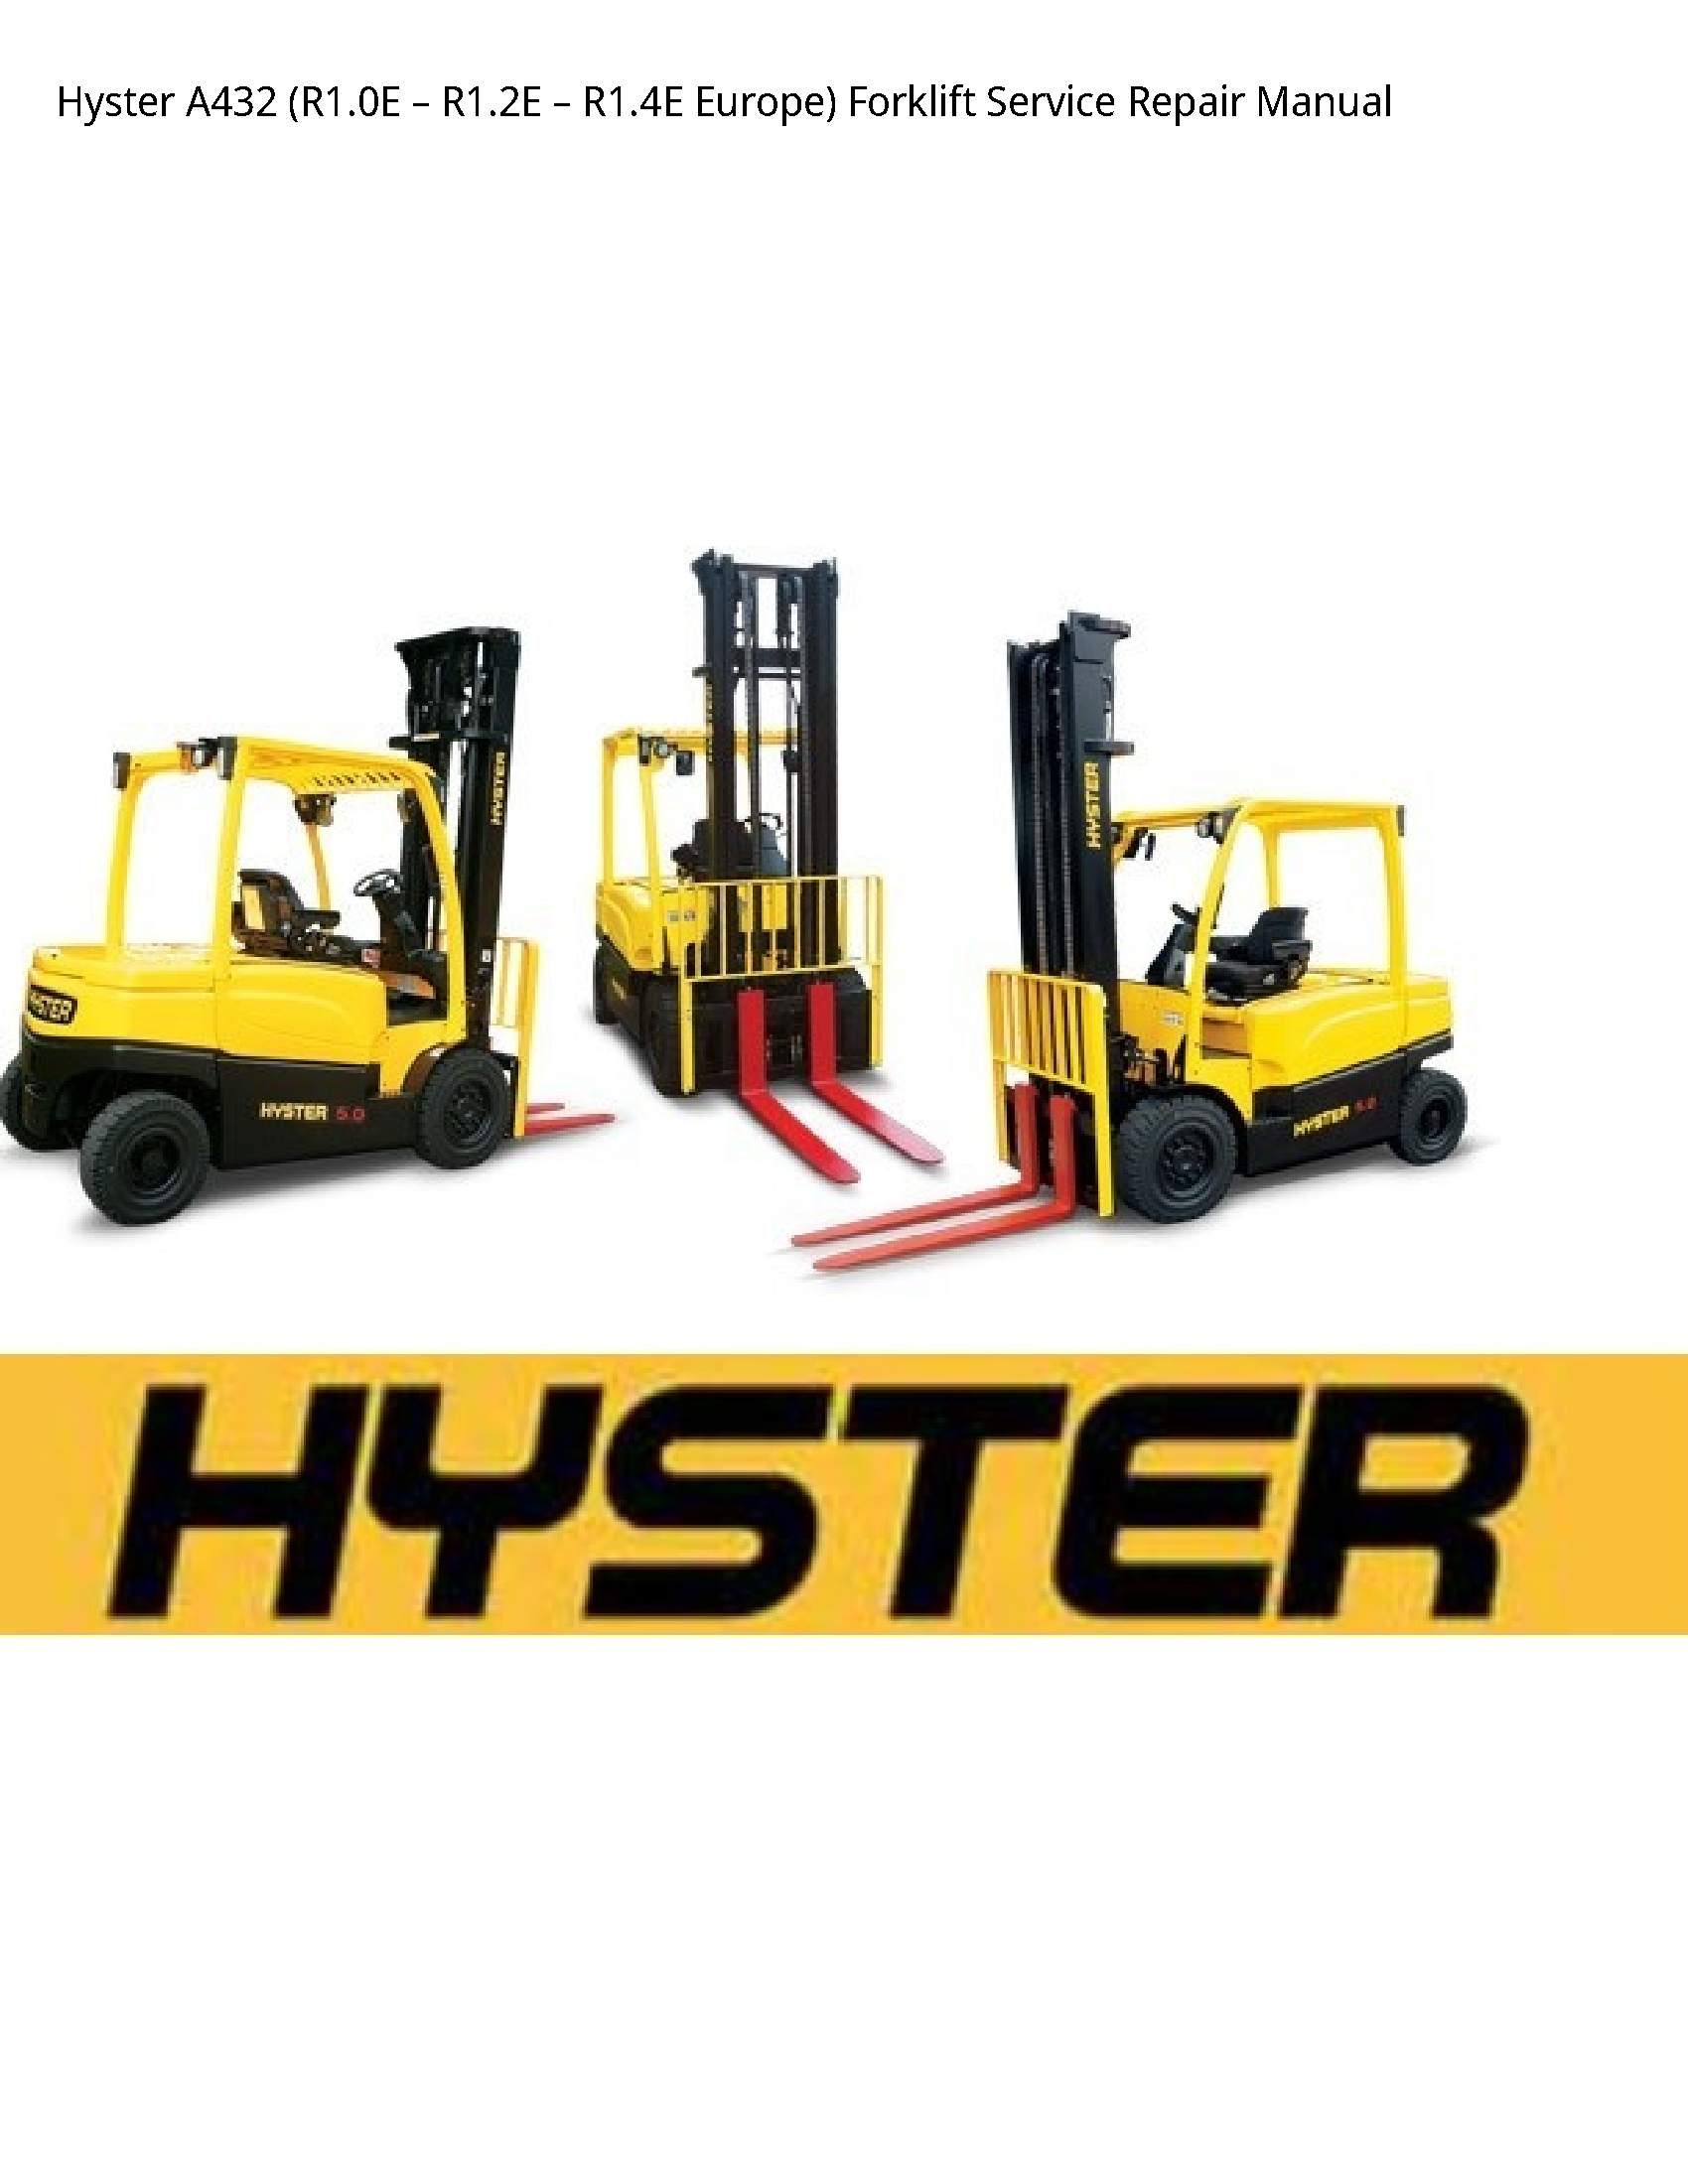 Hyster A432 Europe) Forklift manual